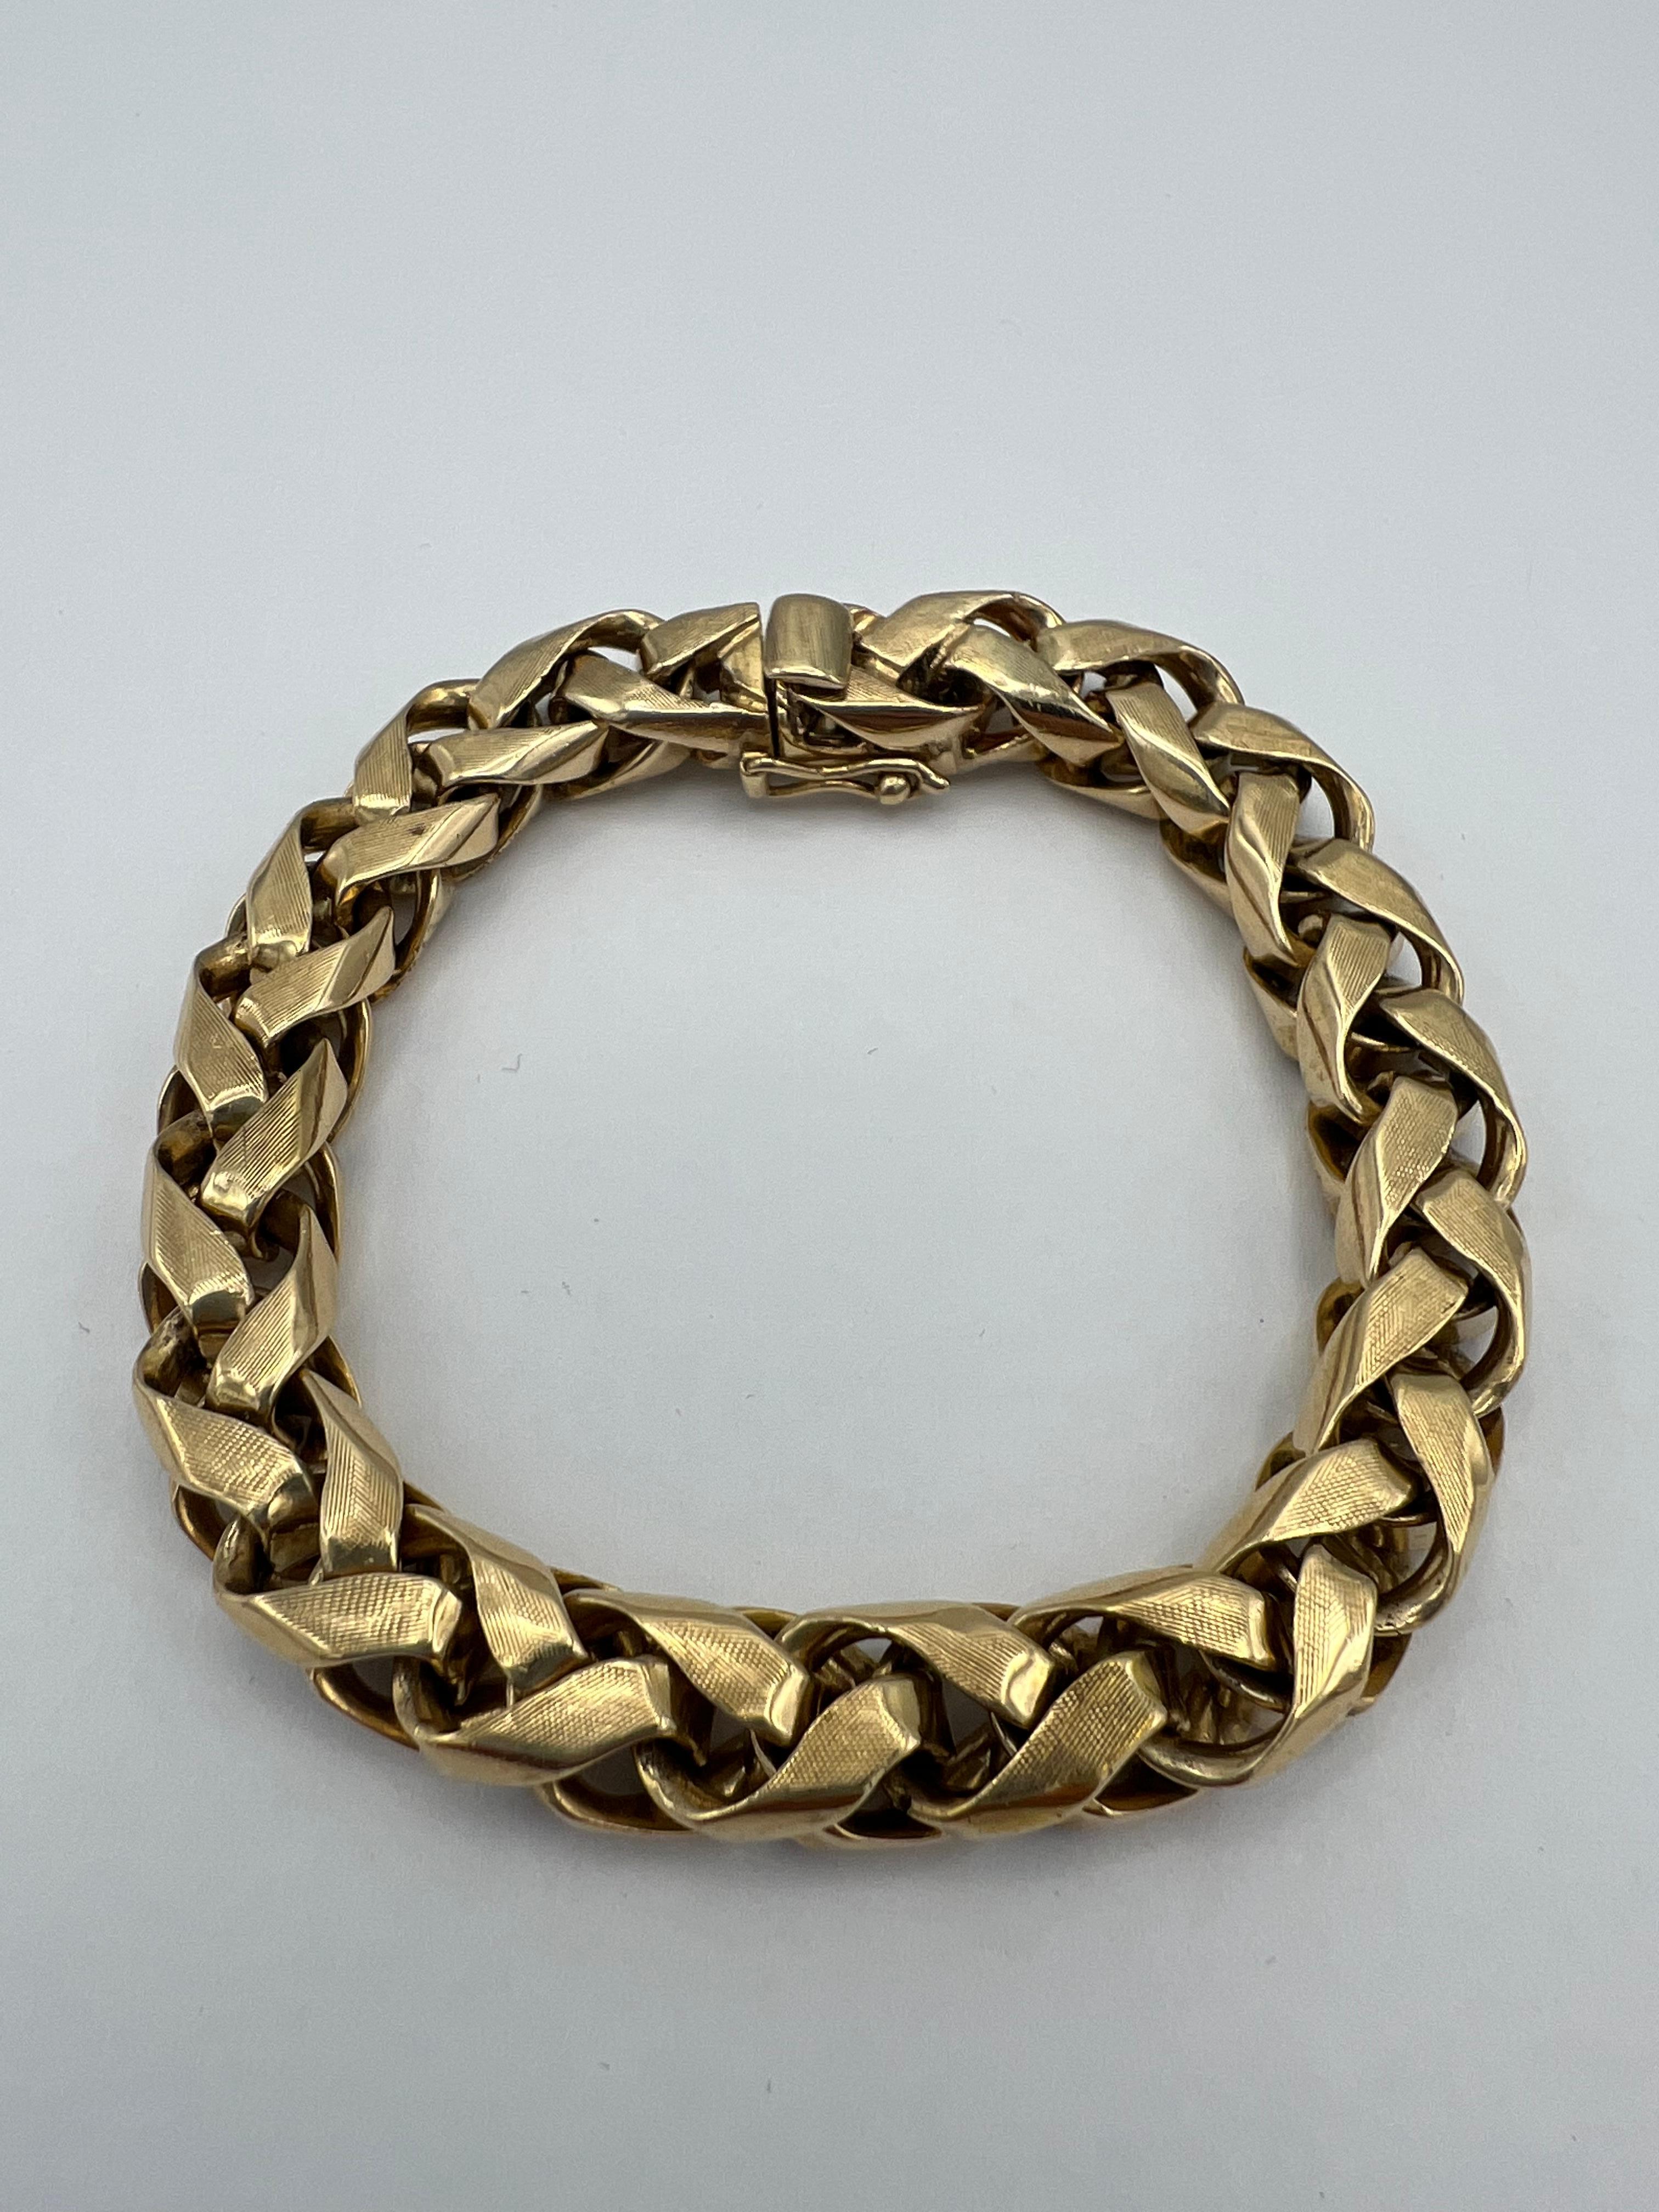 DESIGNER: Tiffany & Co.
CIRCA: 1970’s
MATERIALS: 14k Yellow Gold
WEIGHT: 75.4 grams
MEASUREMENTS: 7.5” x 5/16”
HALLMARKS: Tiffany, 14k
ITEM DETAILS:
​A vintage 14k gold Tiffany&Co. braided bracelet

​This gorgeous bracelet is made of the gold